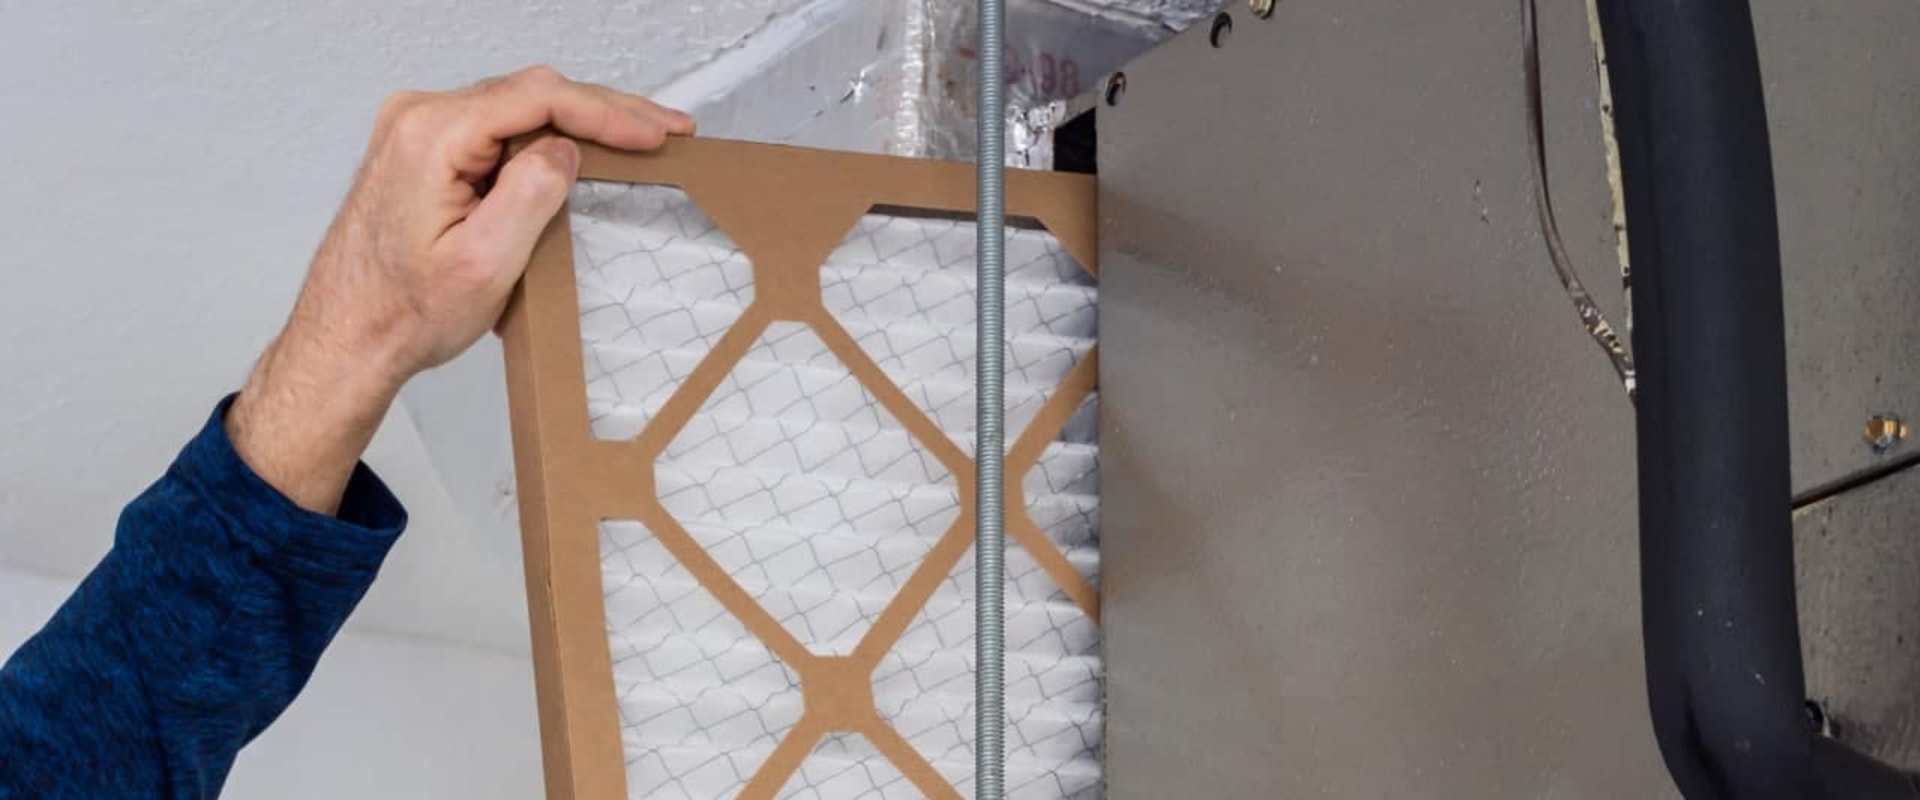 How Often Should You Change a 16x25x4 Furnace Filter?